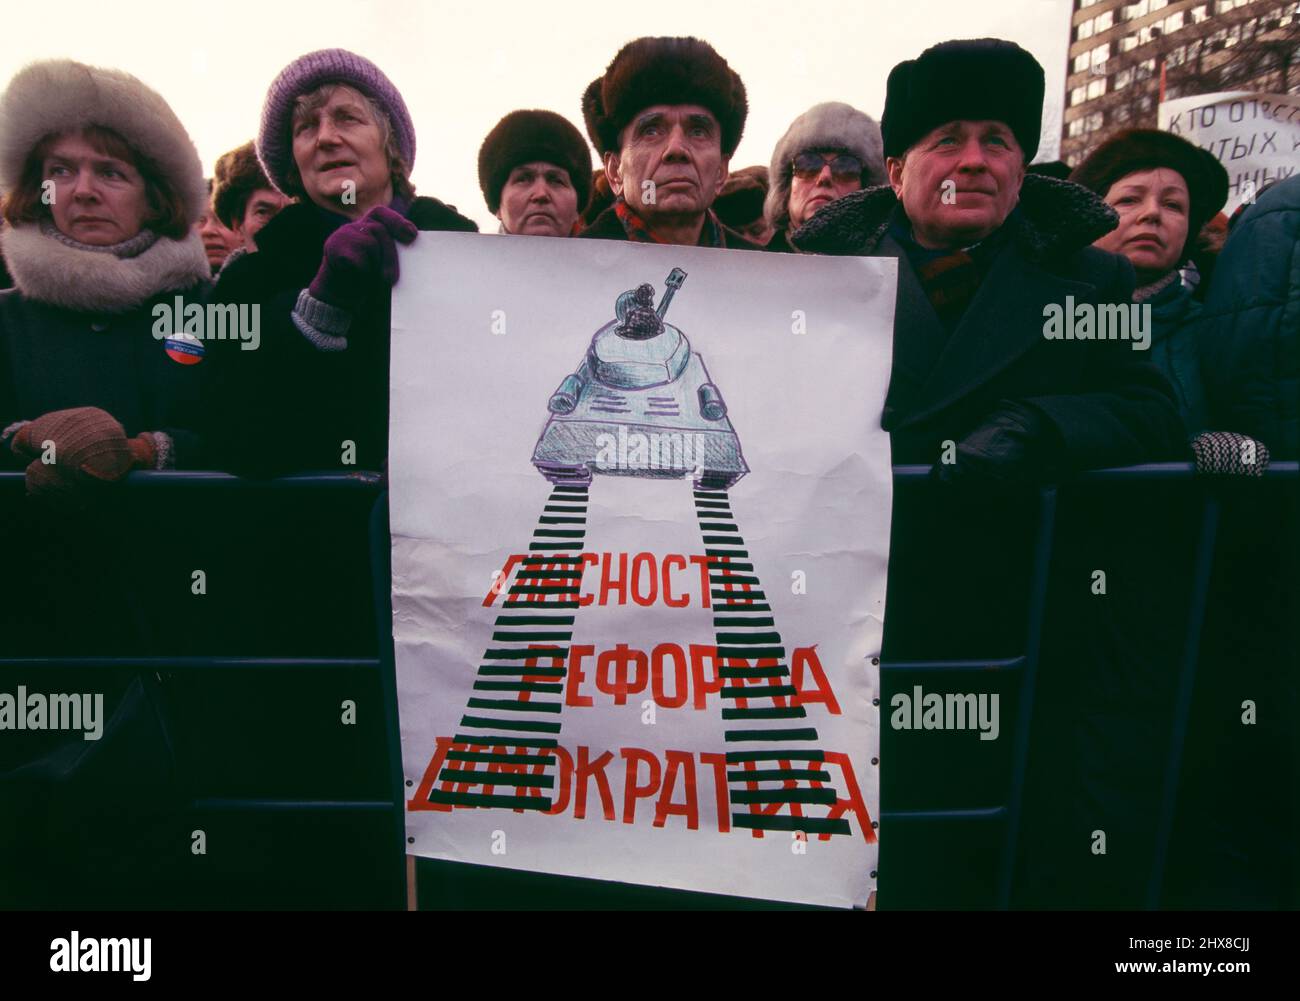 February 1995, Moscow, Russia.  Russians during an anti-war demonstration on Pushkin Square in central Moscow.  The demonstration was organized by Memorial and Soldiers’ Mothers in protest of the First Chechen War (1994-1996).   The protesters stand behind a poster showing a Russian tank driving over the words “Glasnost, Reform, Democracy” written in Cyrillic. Stock Photo